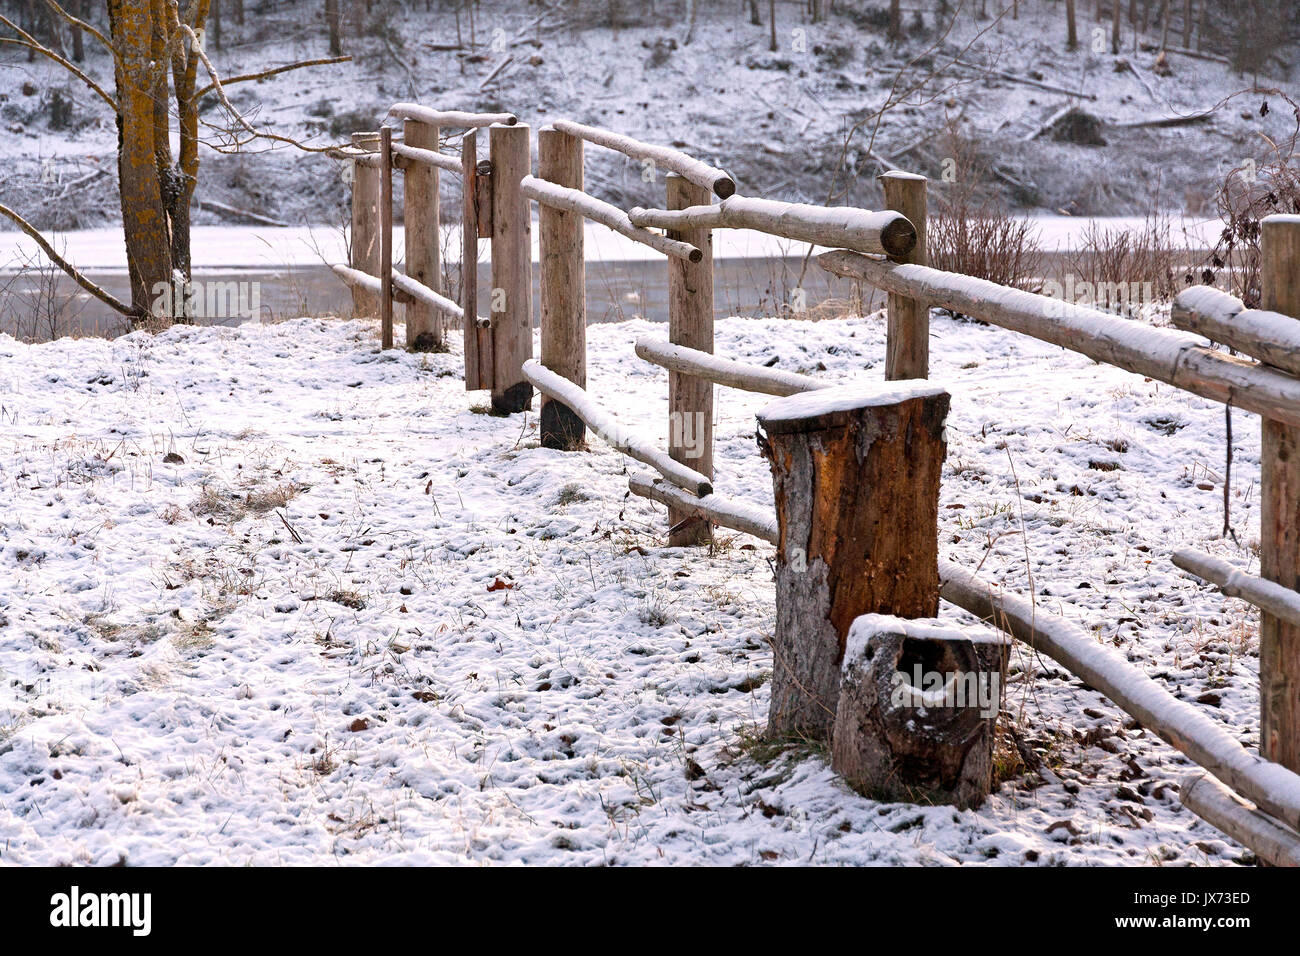 Rural nature seasonal scene: wooden fence in winter forest near a river covered by snow Stock Photo